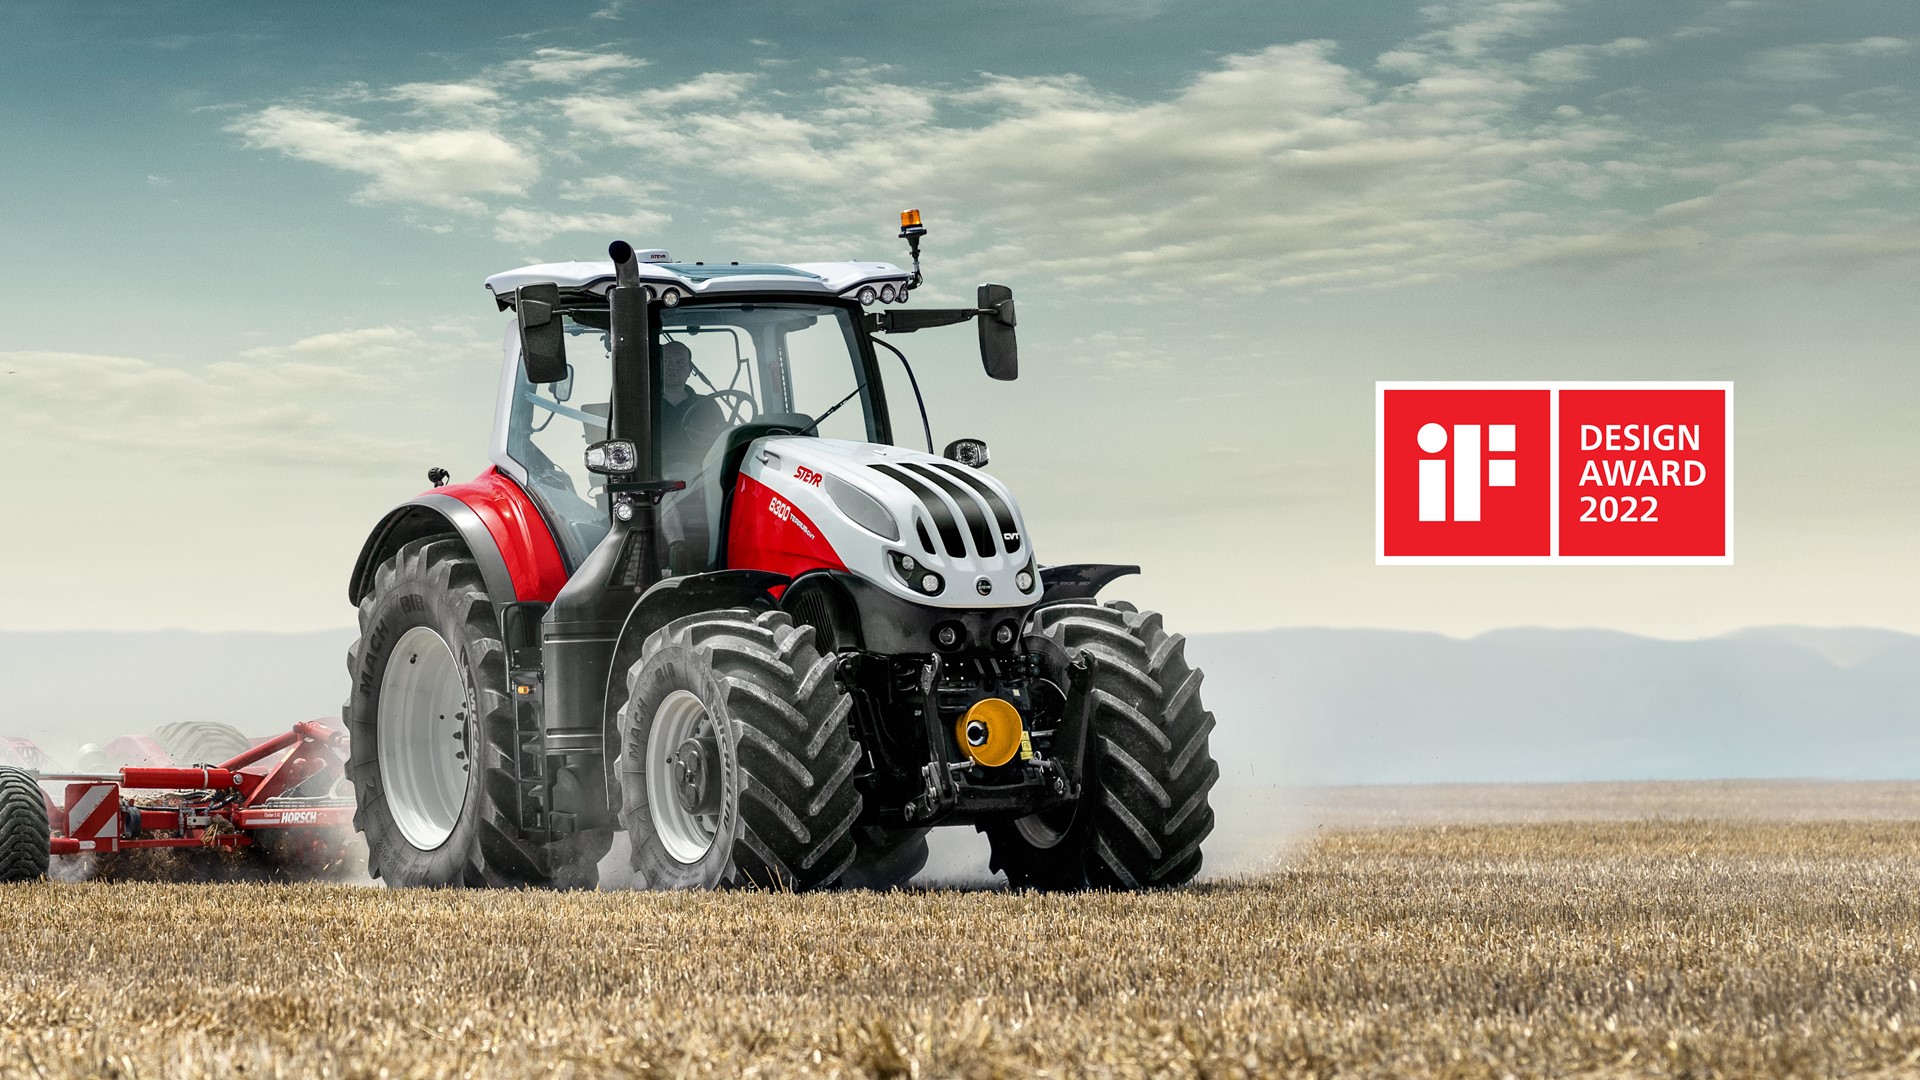 STEYR wins iF DESIGN AWARD for Terrus CVT tractor